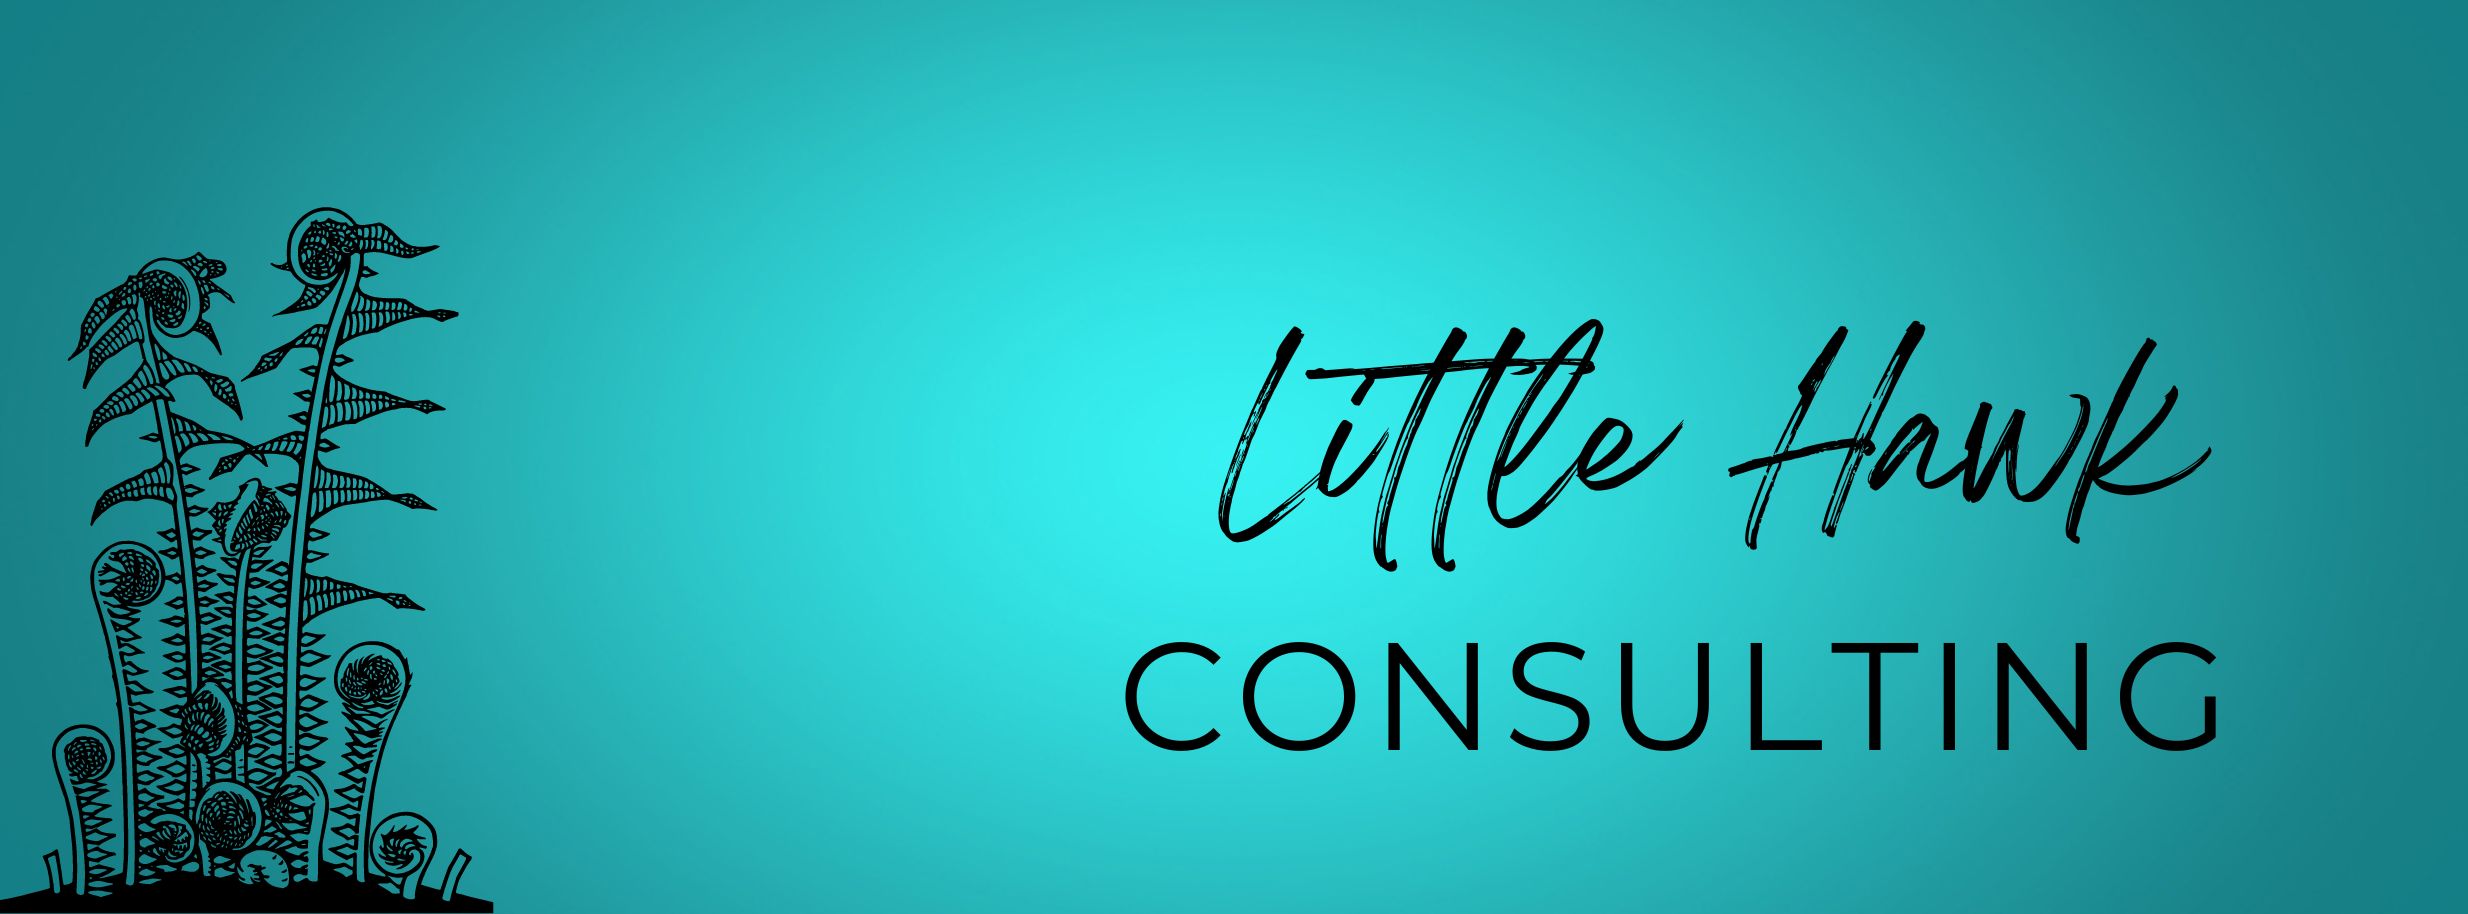 Little Hawk Consulting Teal Banner